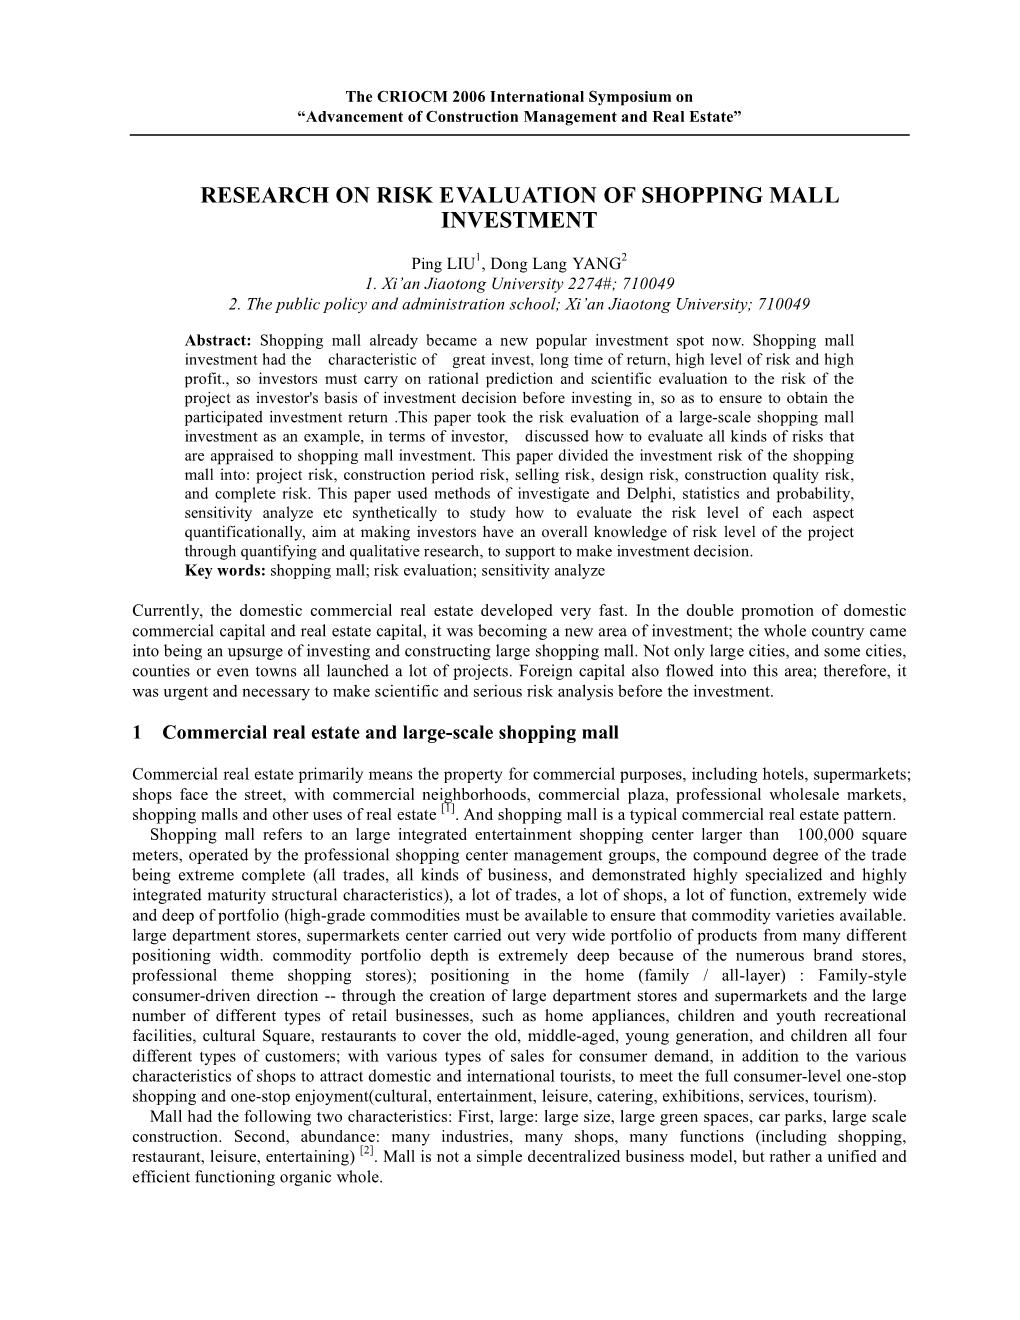 Research on Risk Evaluation of Shopping Mall Investment